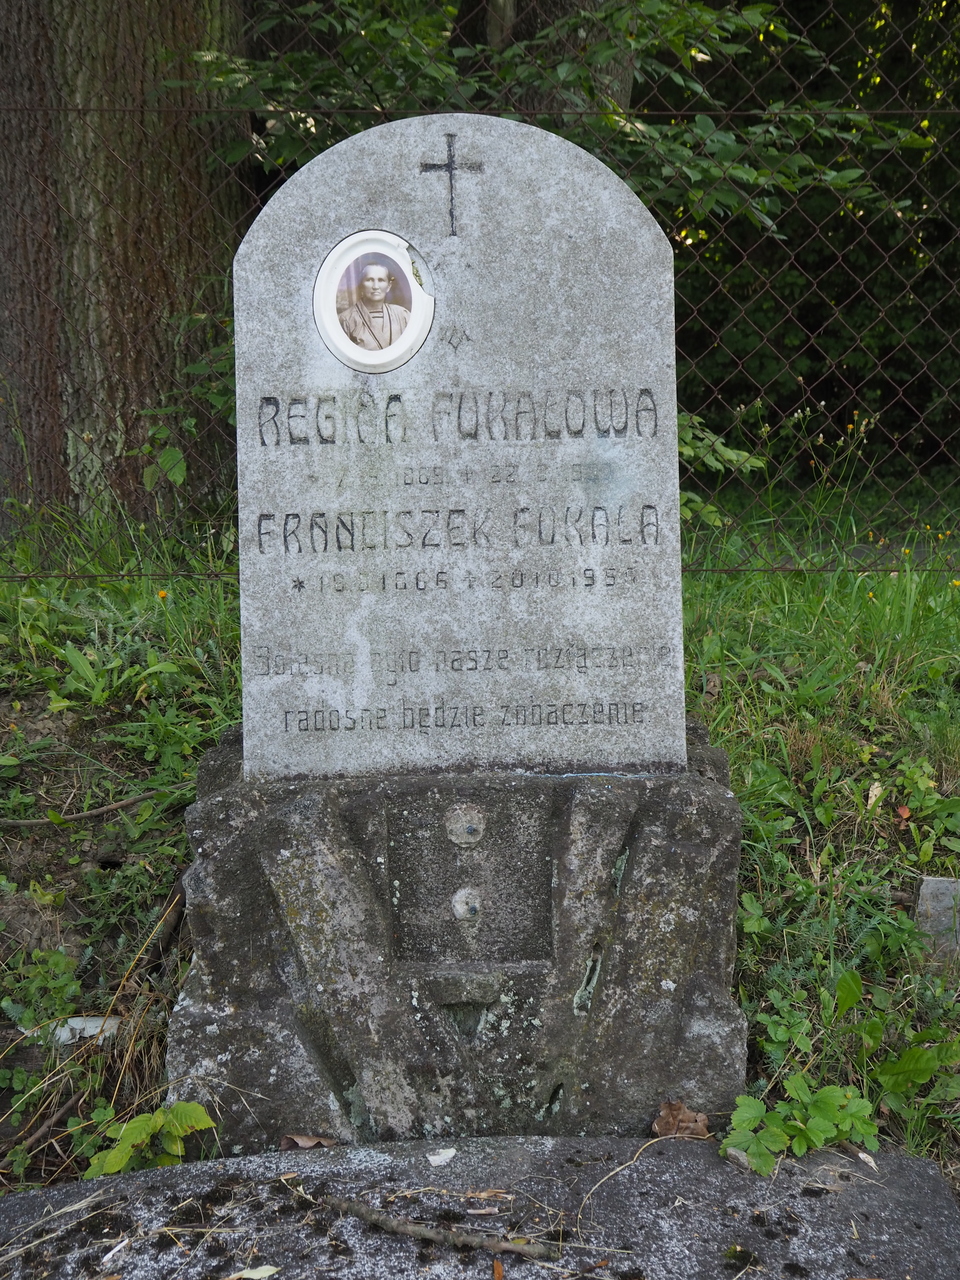 Fragment of a tombstone of František and Regina Fuka³, cemetery in Karviná Doły, state from 2022